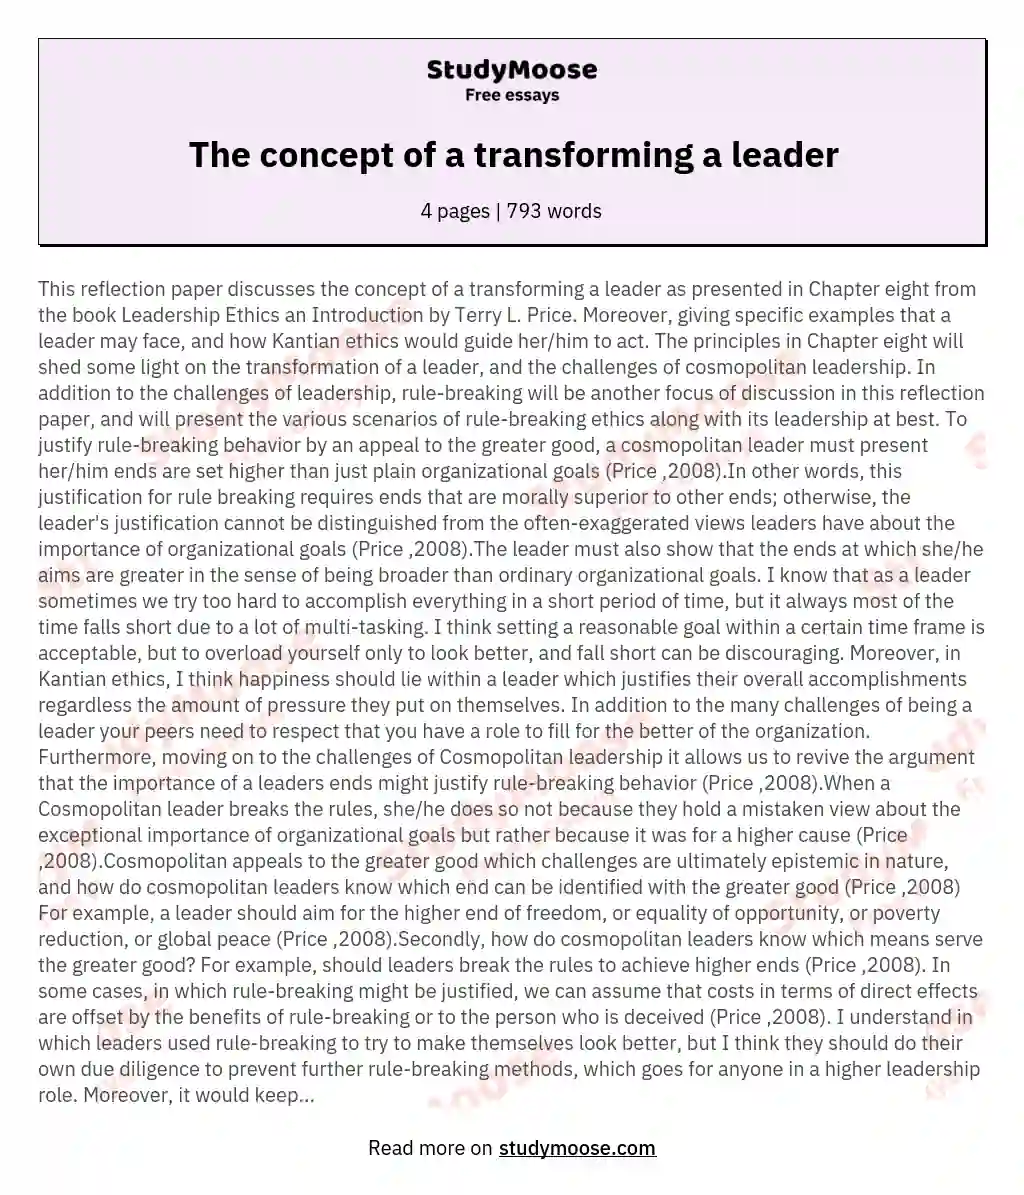 The concept of a transforming a leader essay